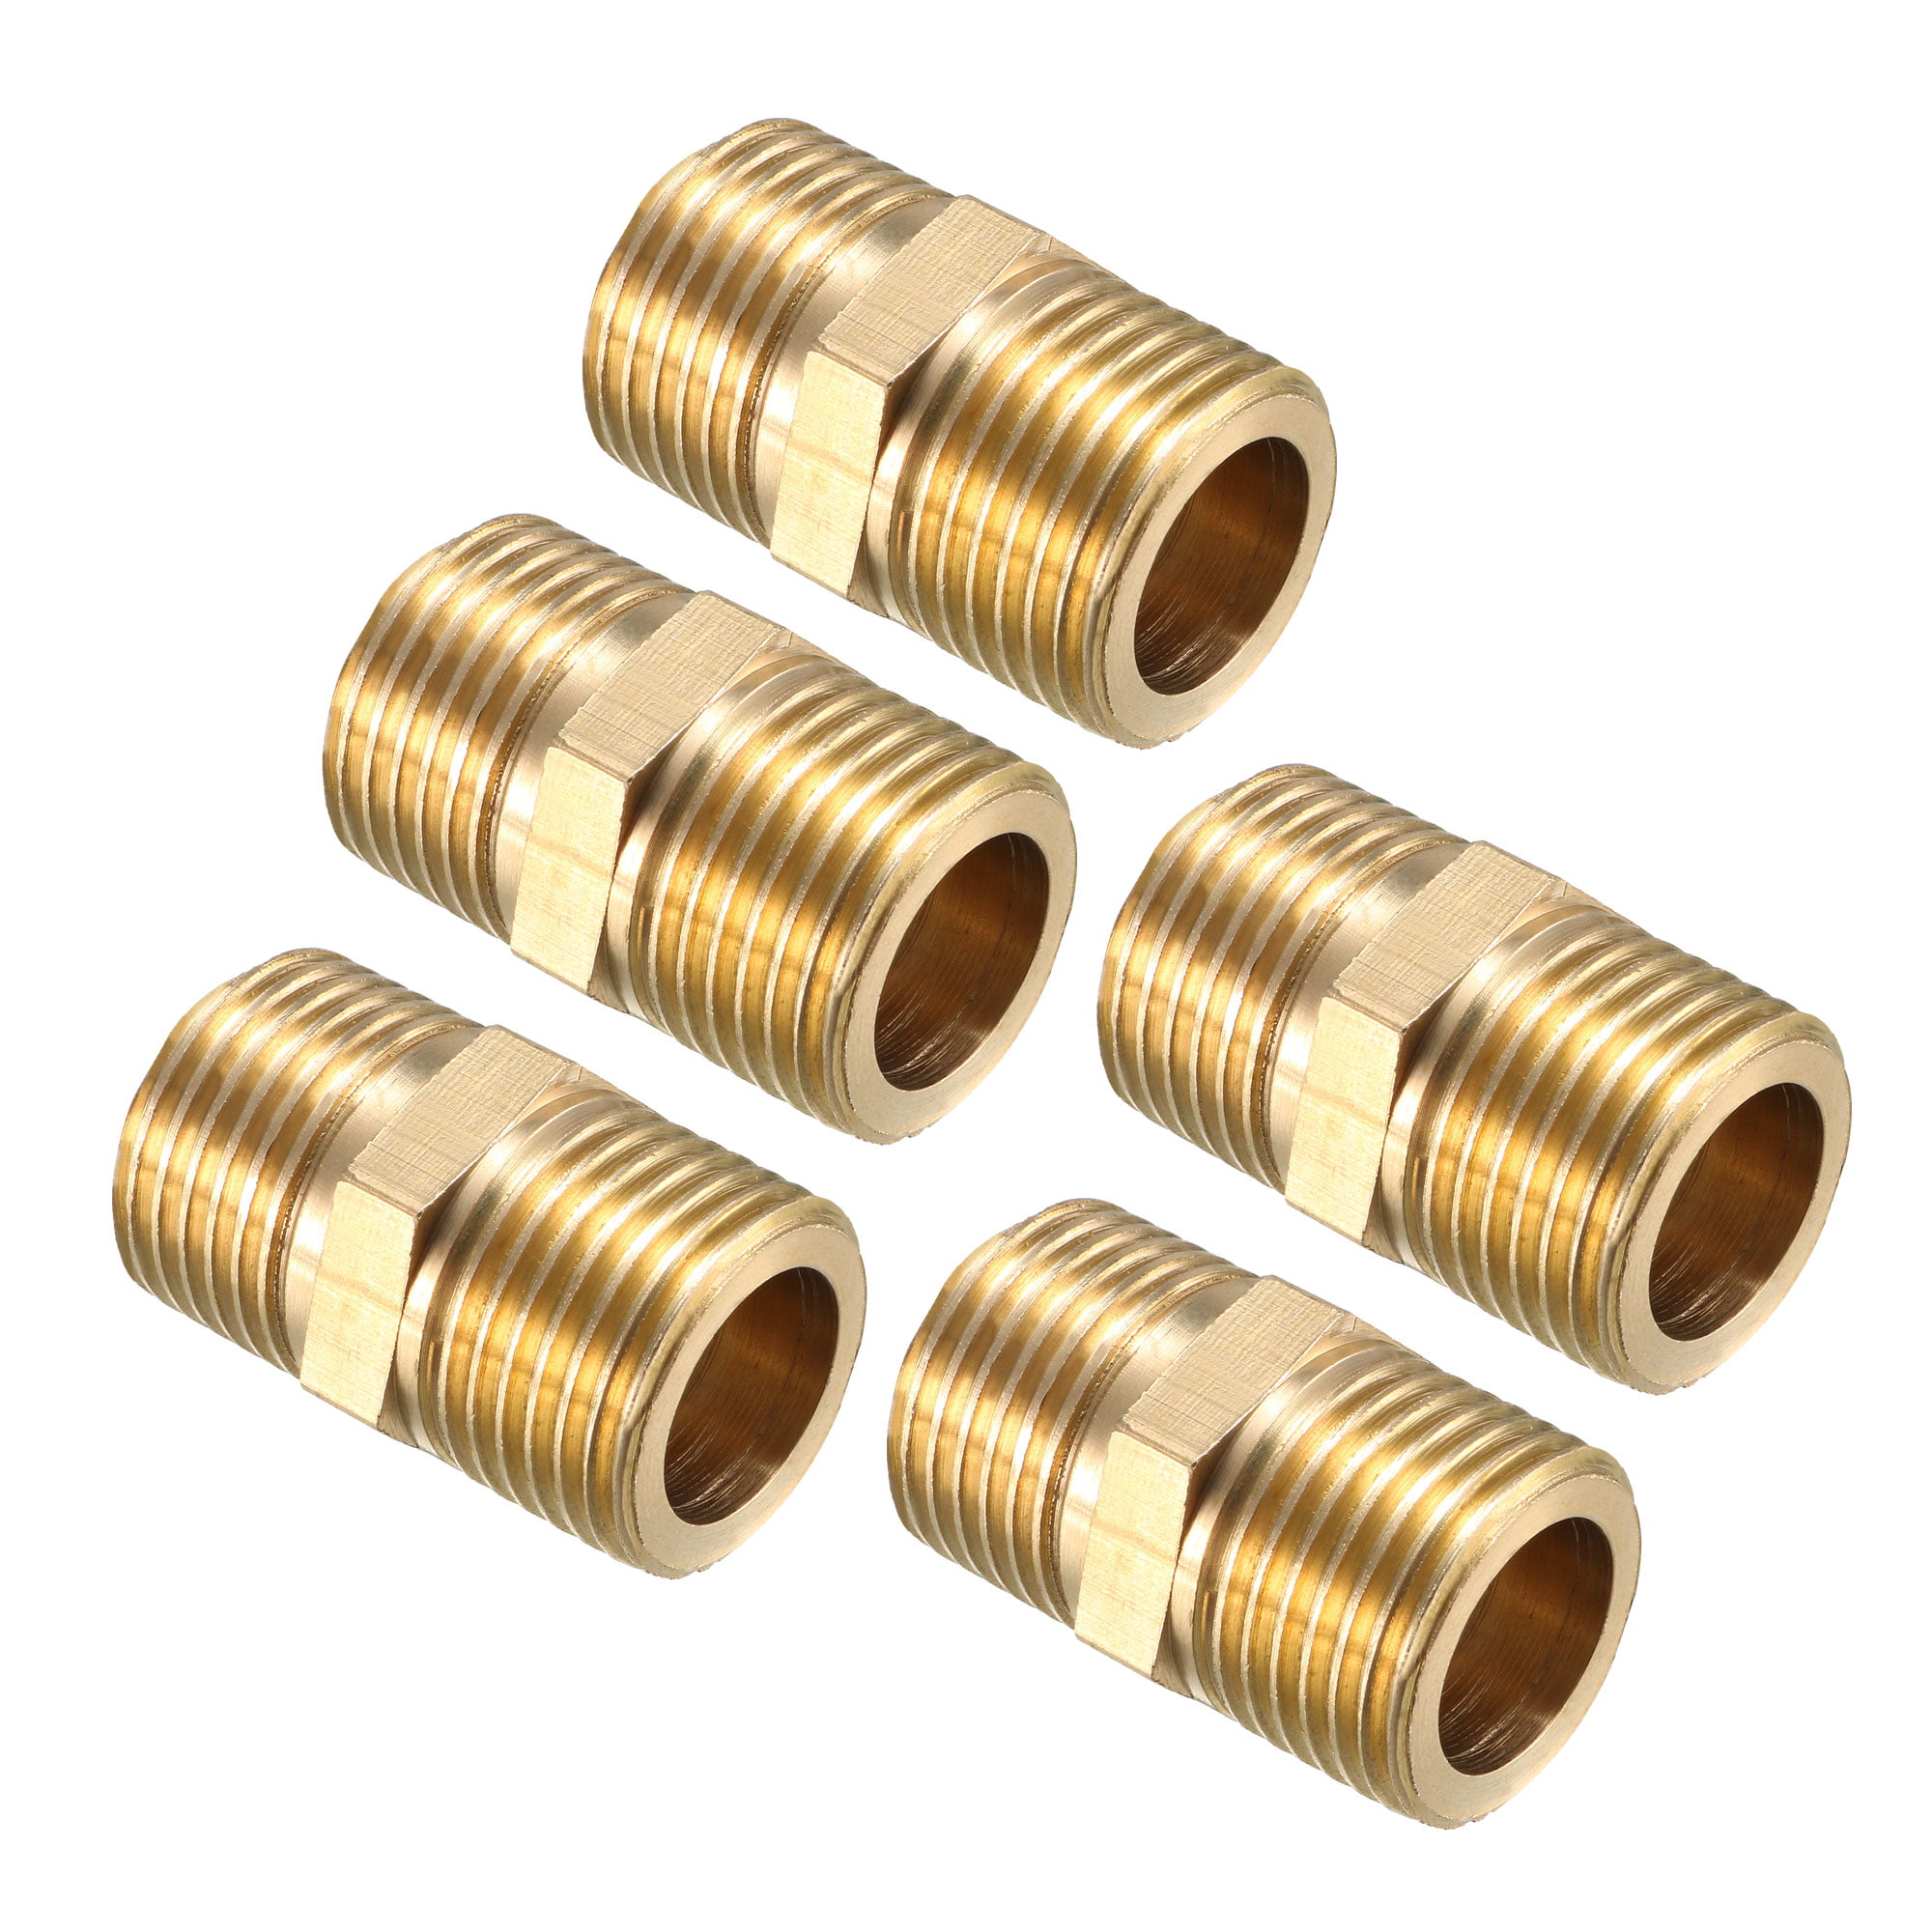 1/2BSP to 1/2BSP Male Thread Brass Pipe Hex Nipple Fitting 5 Pcs 